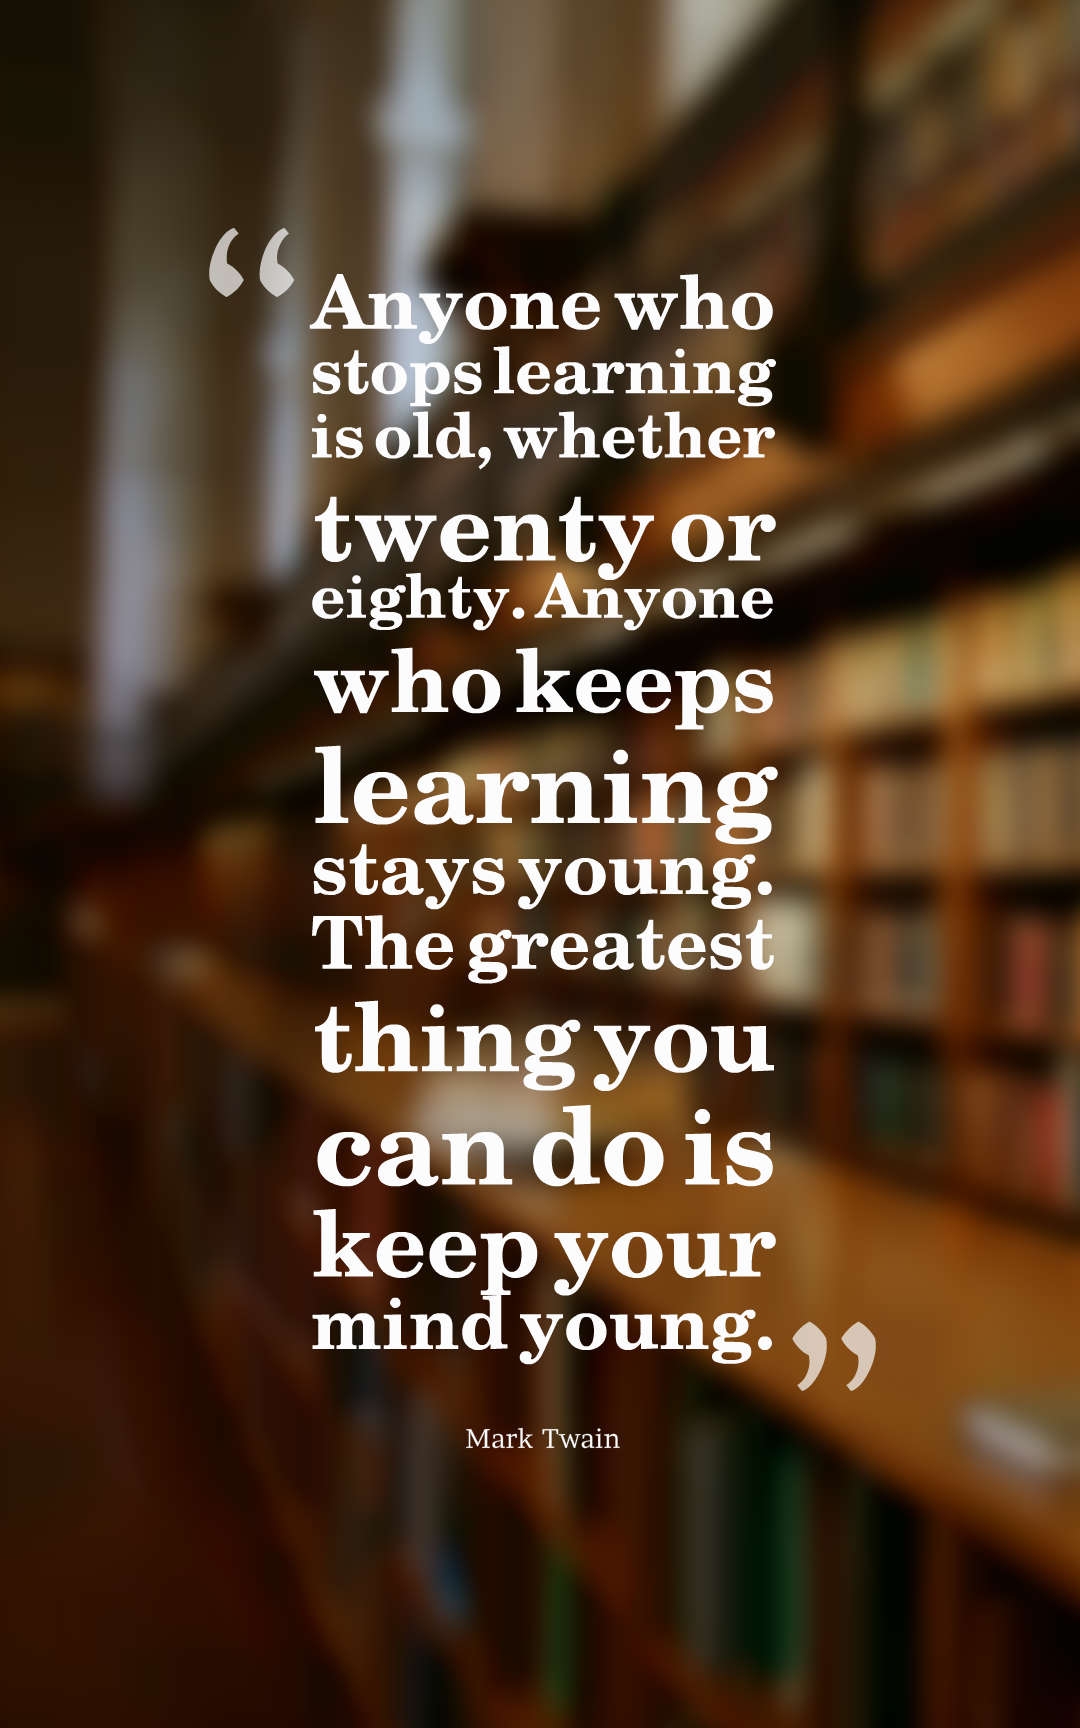 "Anyone who stops learning is old." - Mark Twain  The 